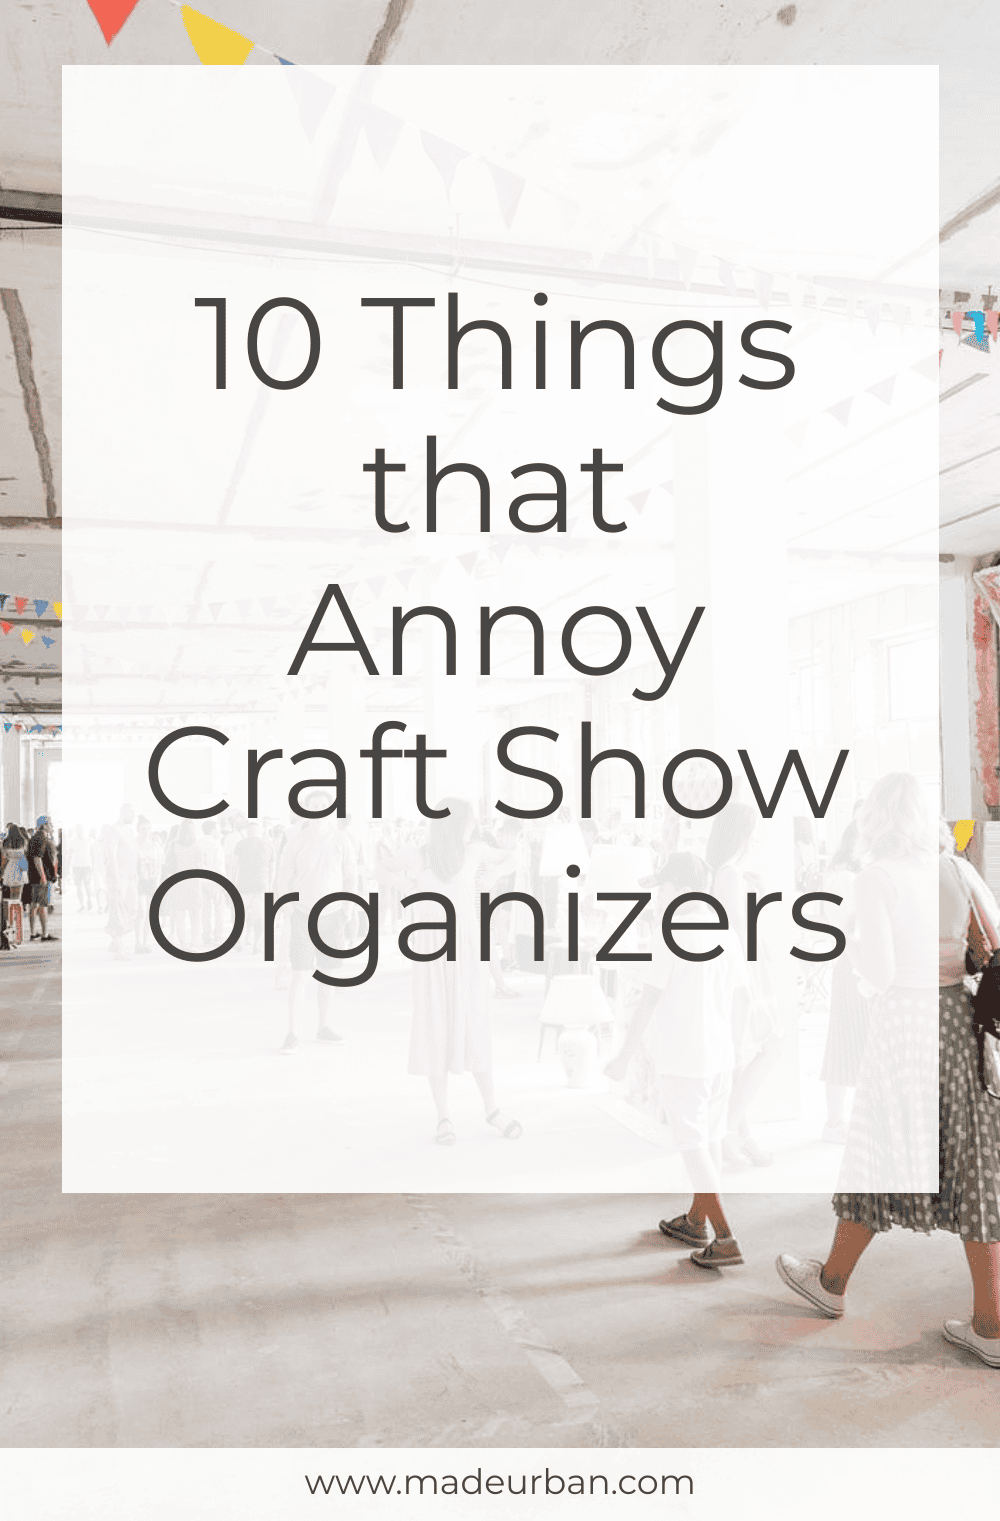 10 Things that Annoy Craft Show Organizers